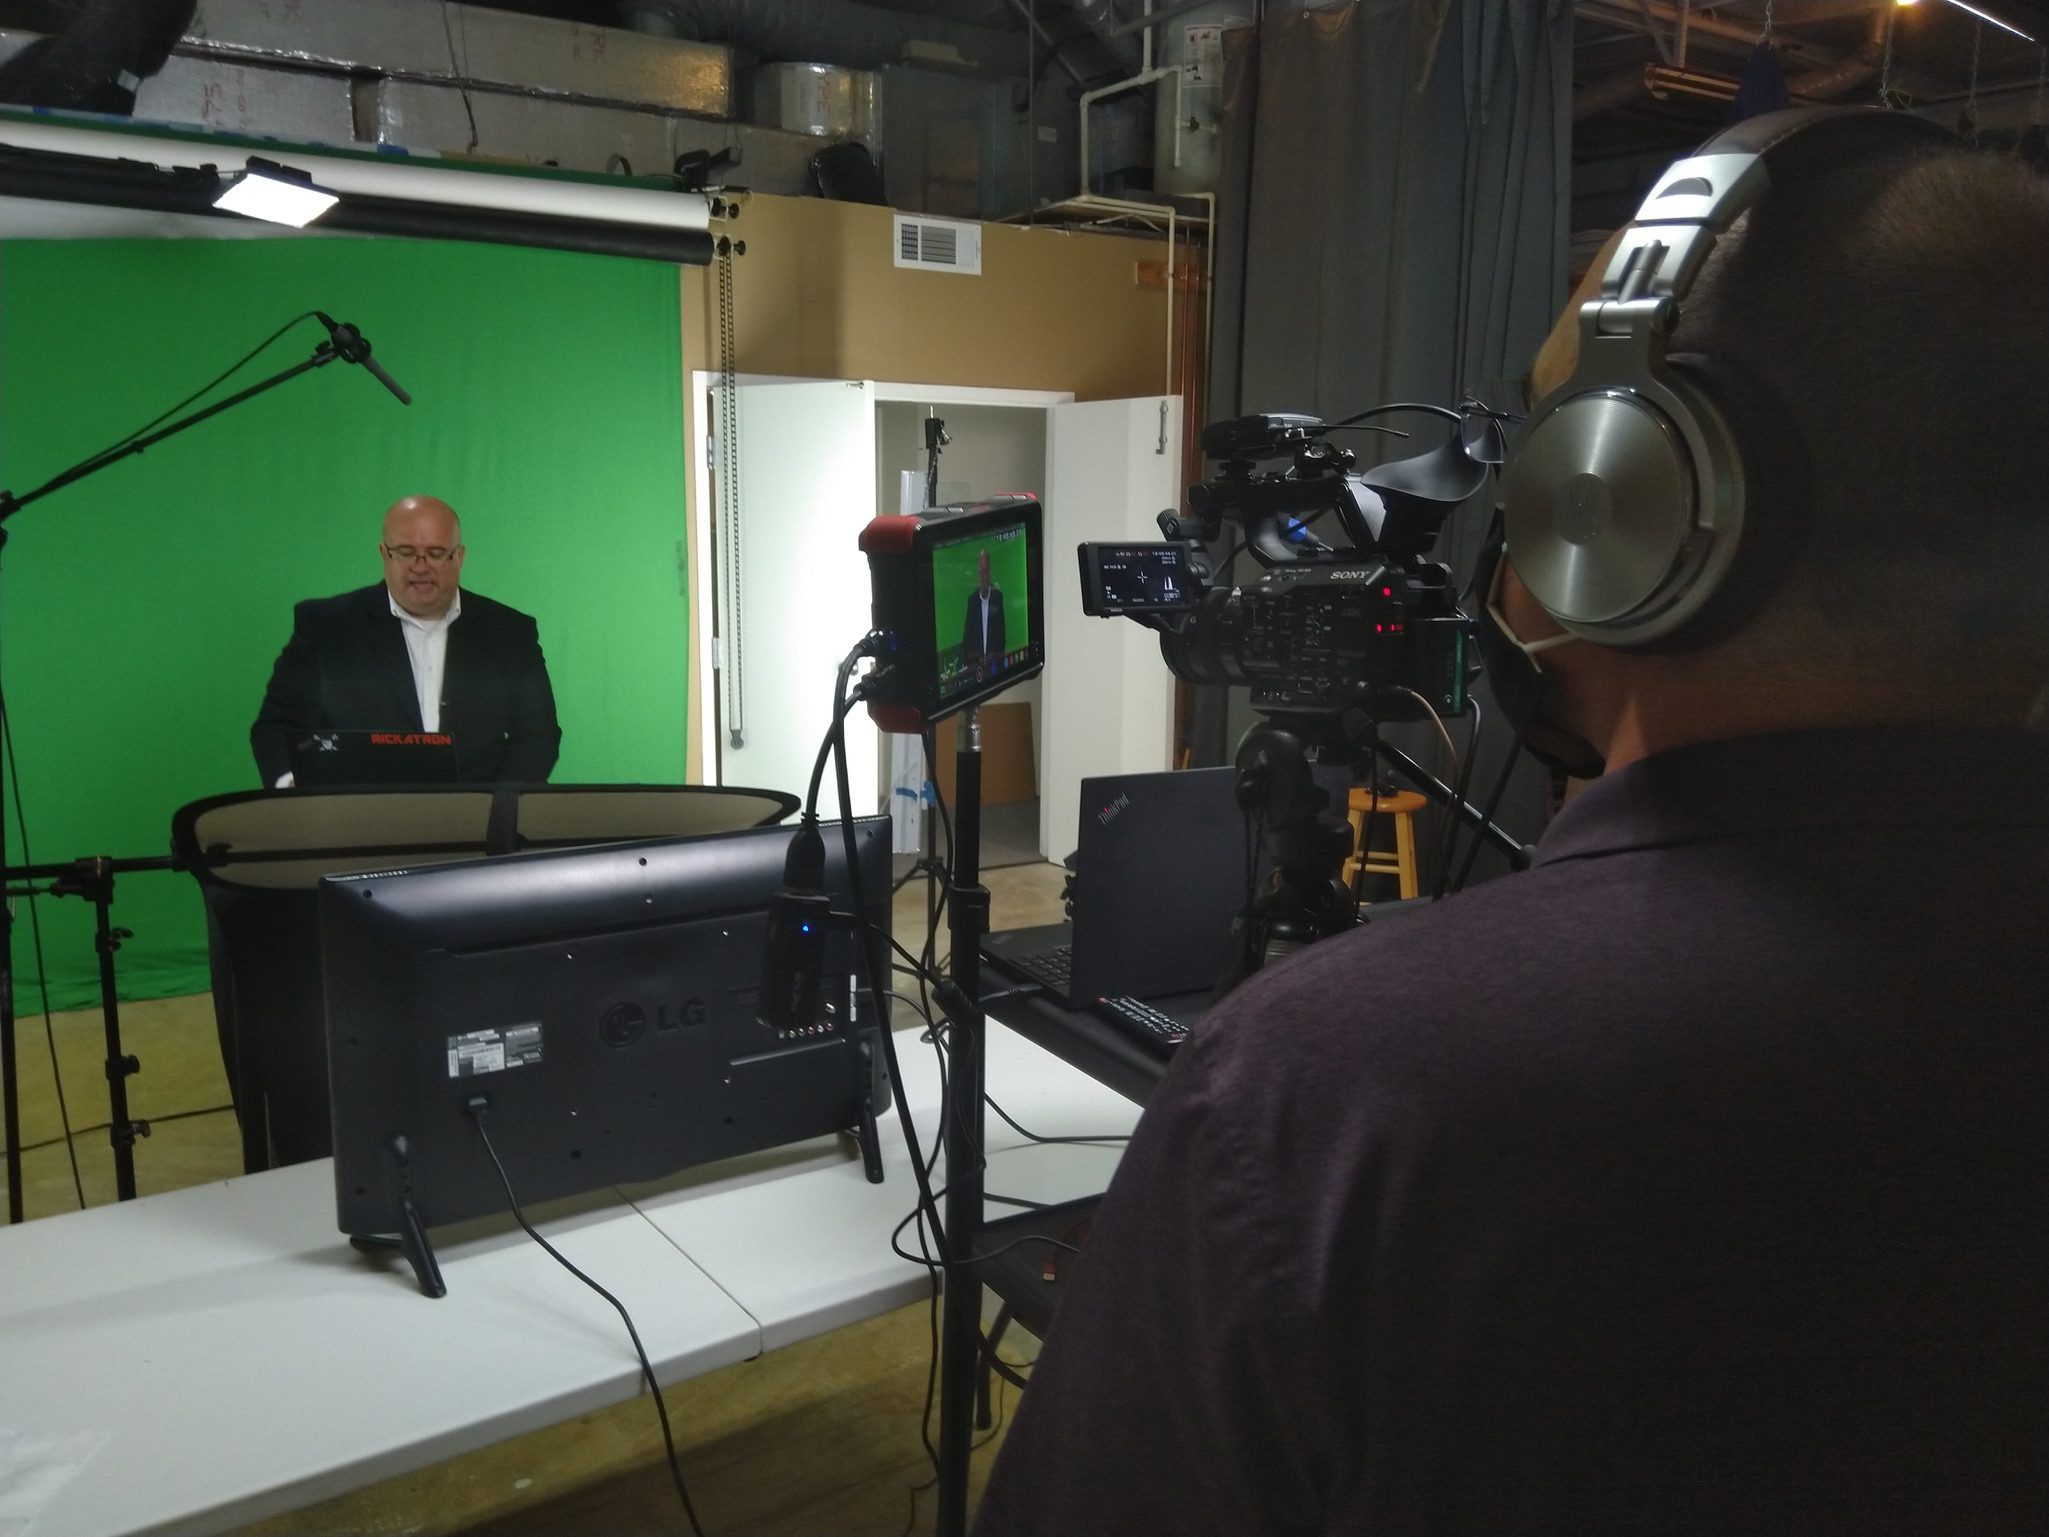 Behind the scenes shooting of the on green screen in studio